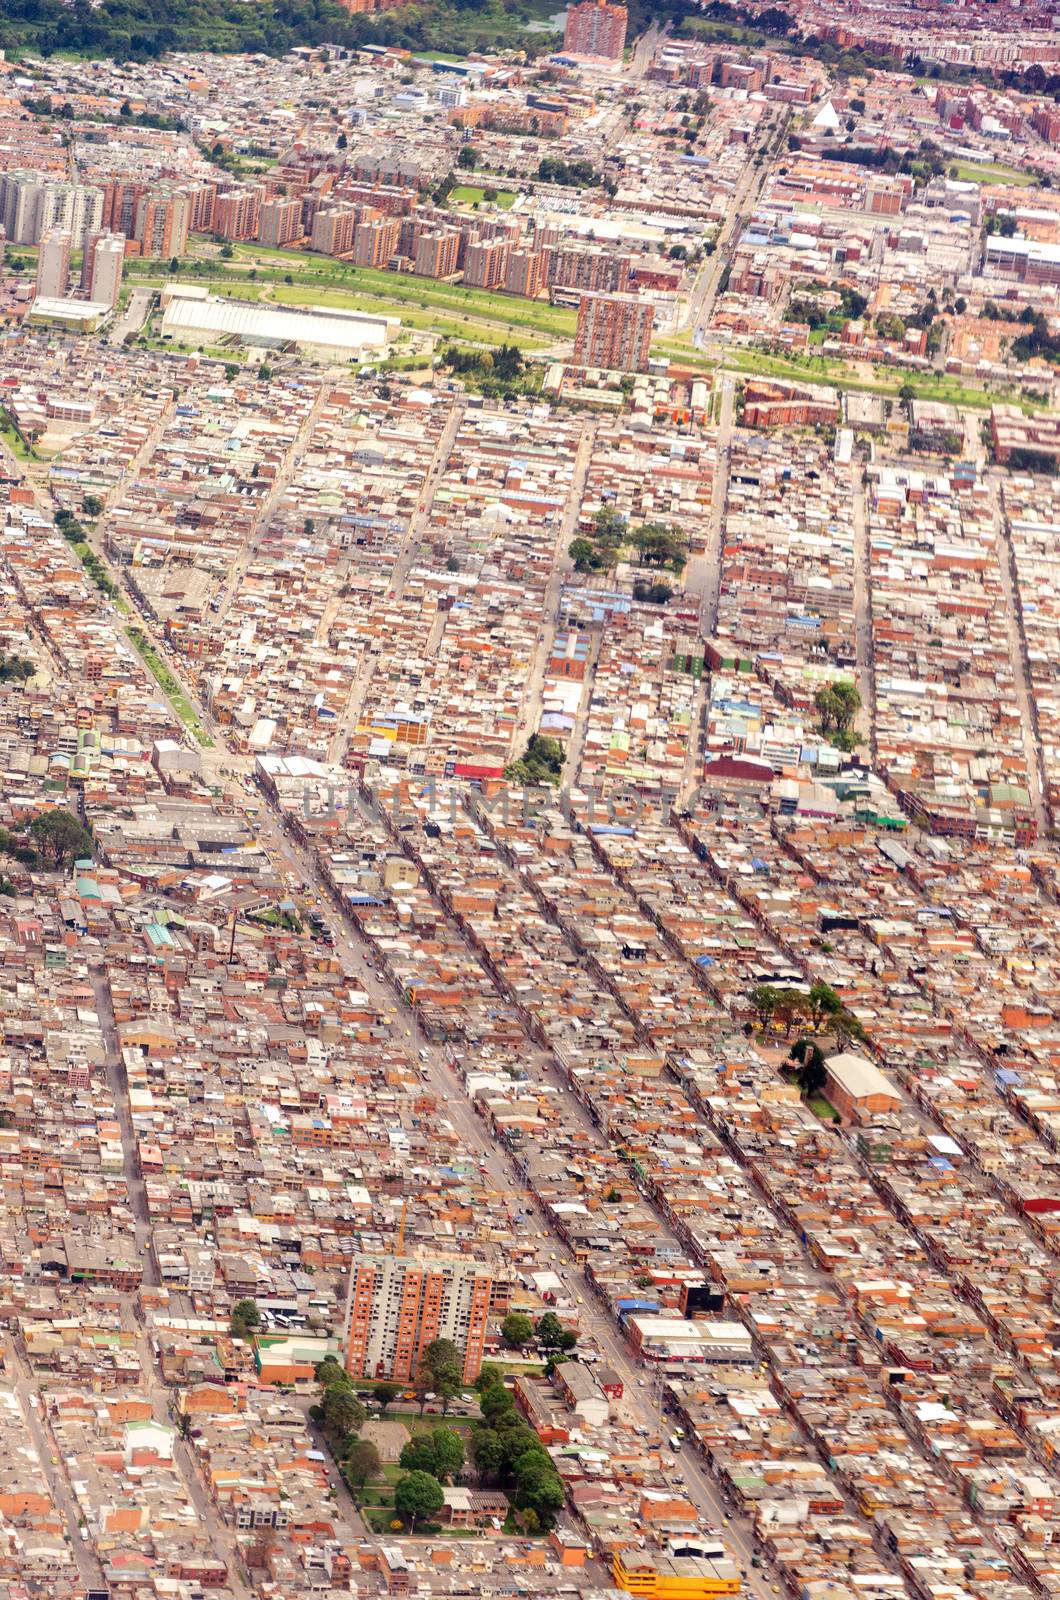 View of Bogota, Colombia as seen from an airplane